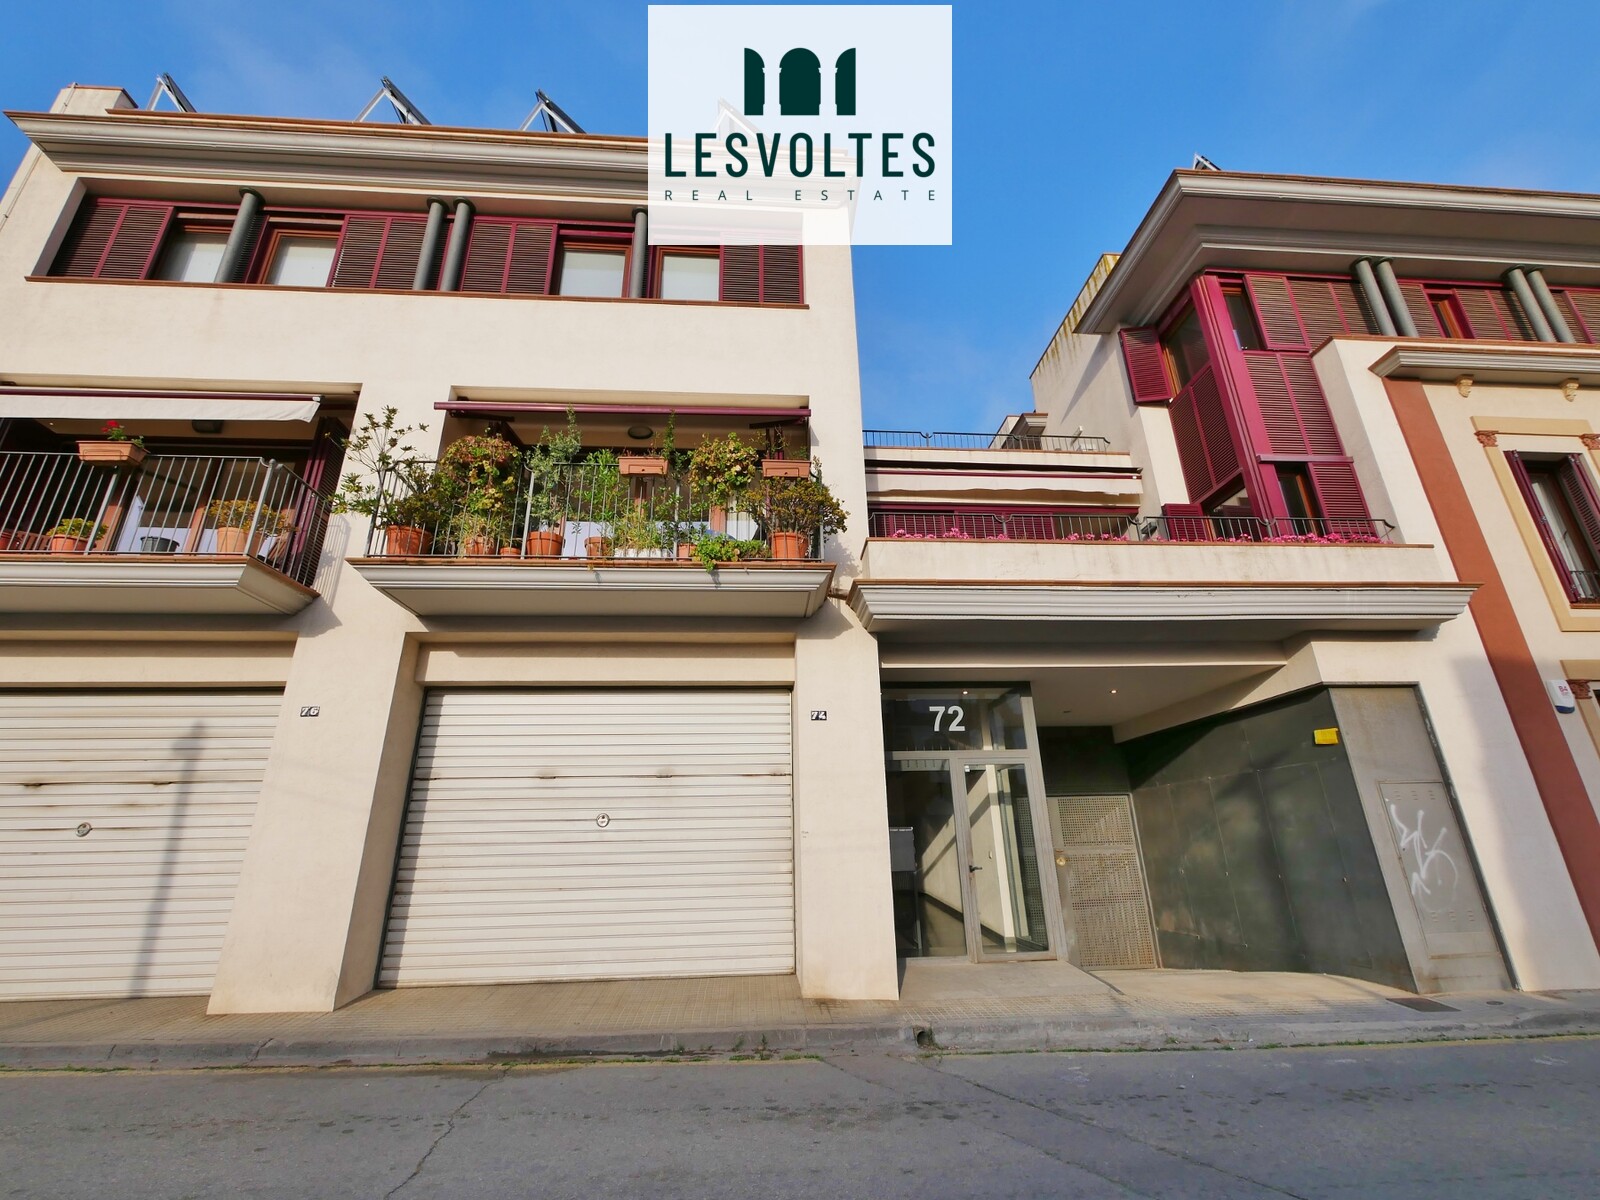 TRIPLEX IN PERFECT CONDITION AND HIGH QUALITY FINISHES NEAR THE CENTER OF PALAFRUGELL